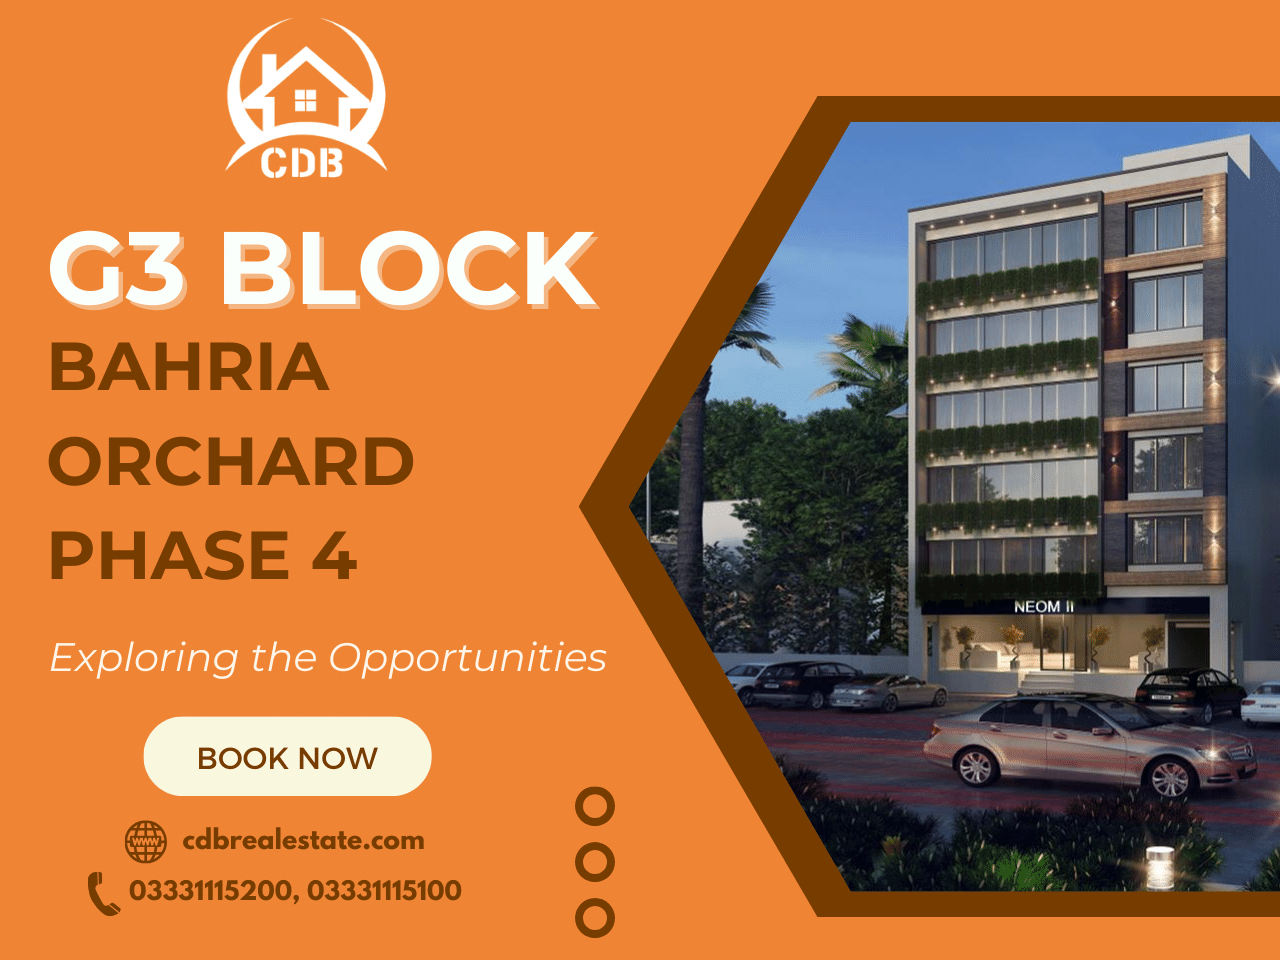 G3 Block in Bahria Orchard Phase 4